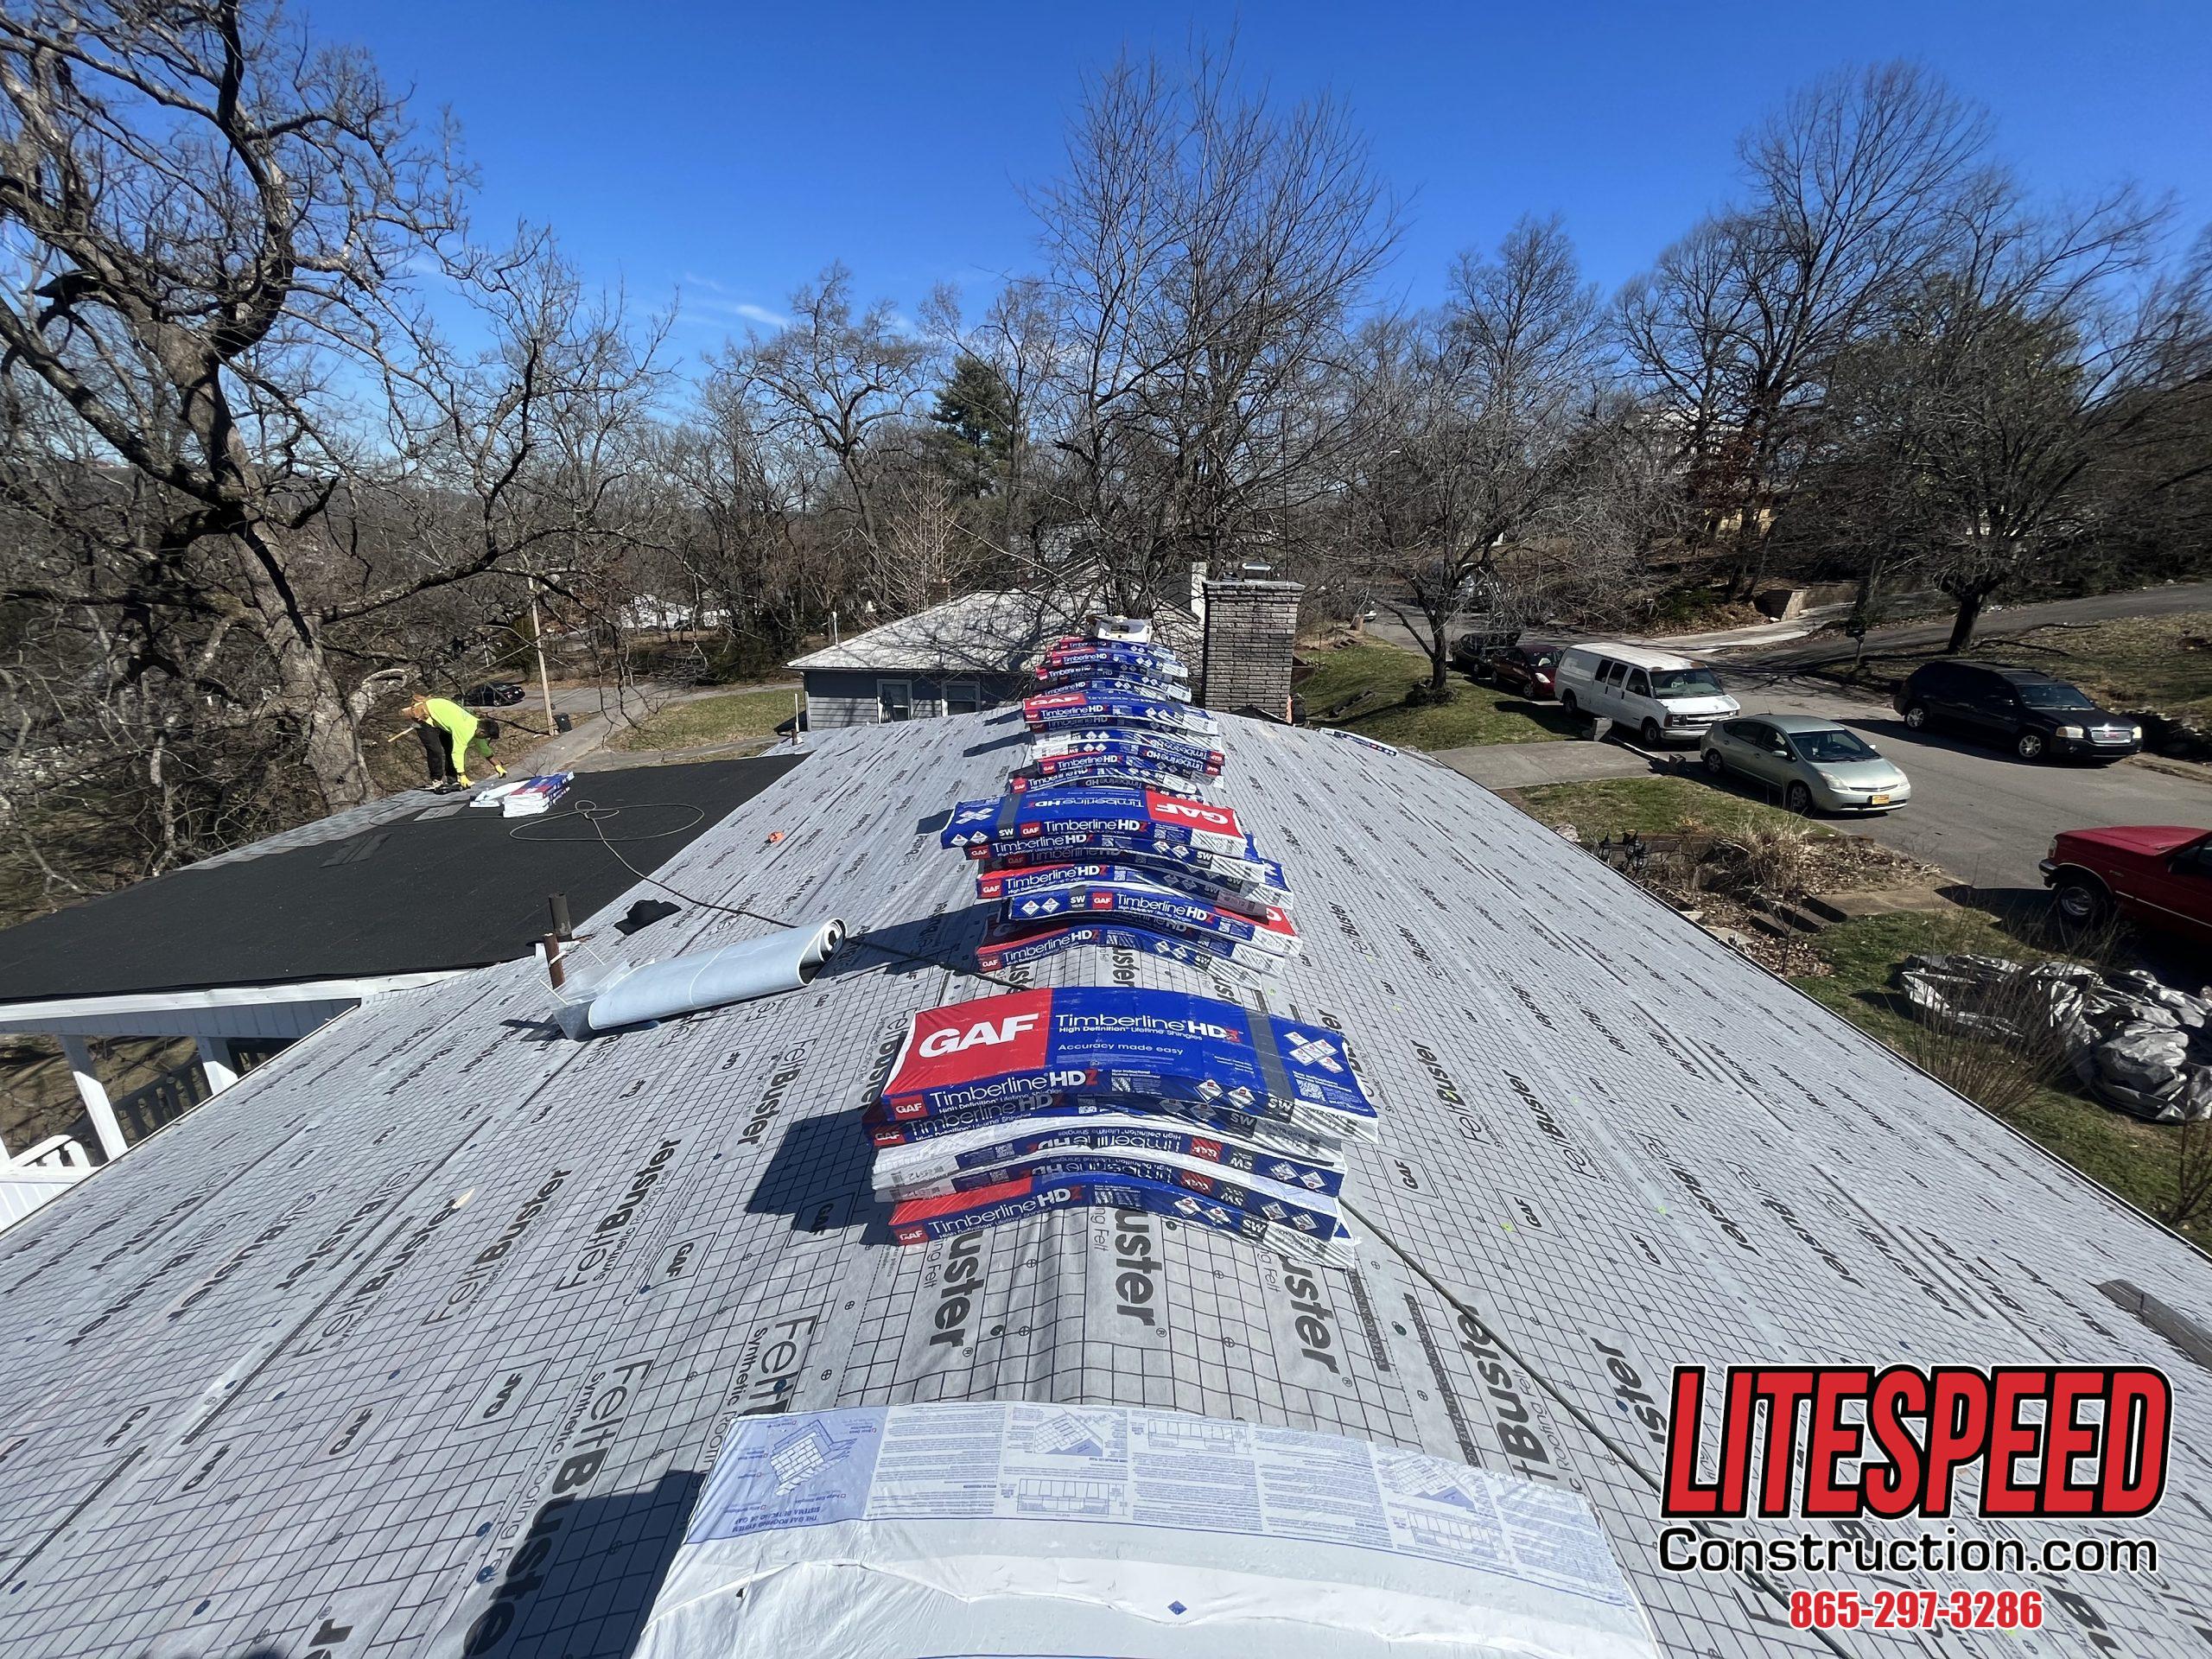 This is a picture of shingles ready to be laid on a rood